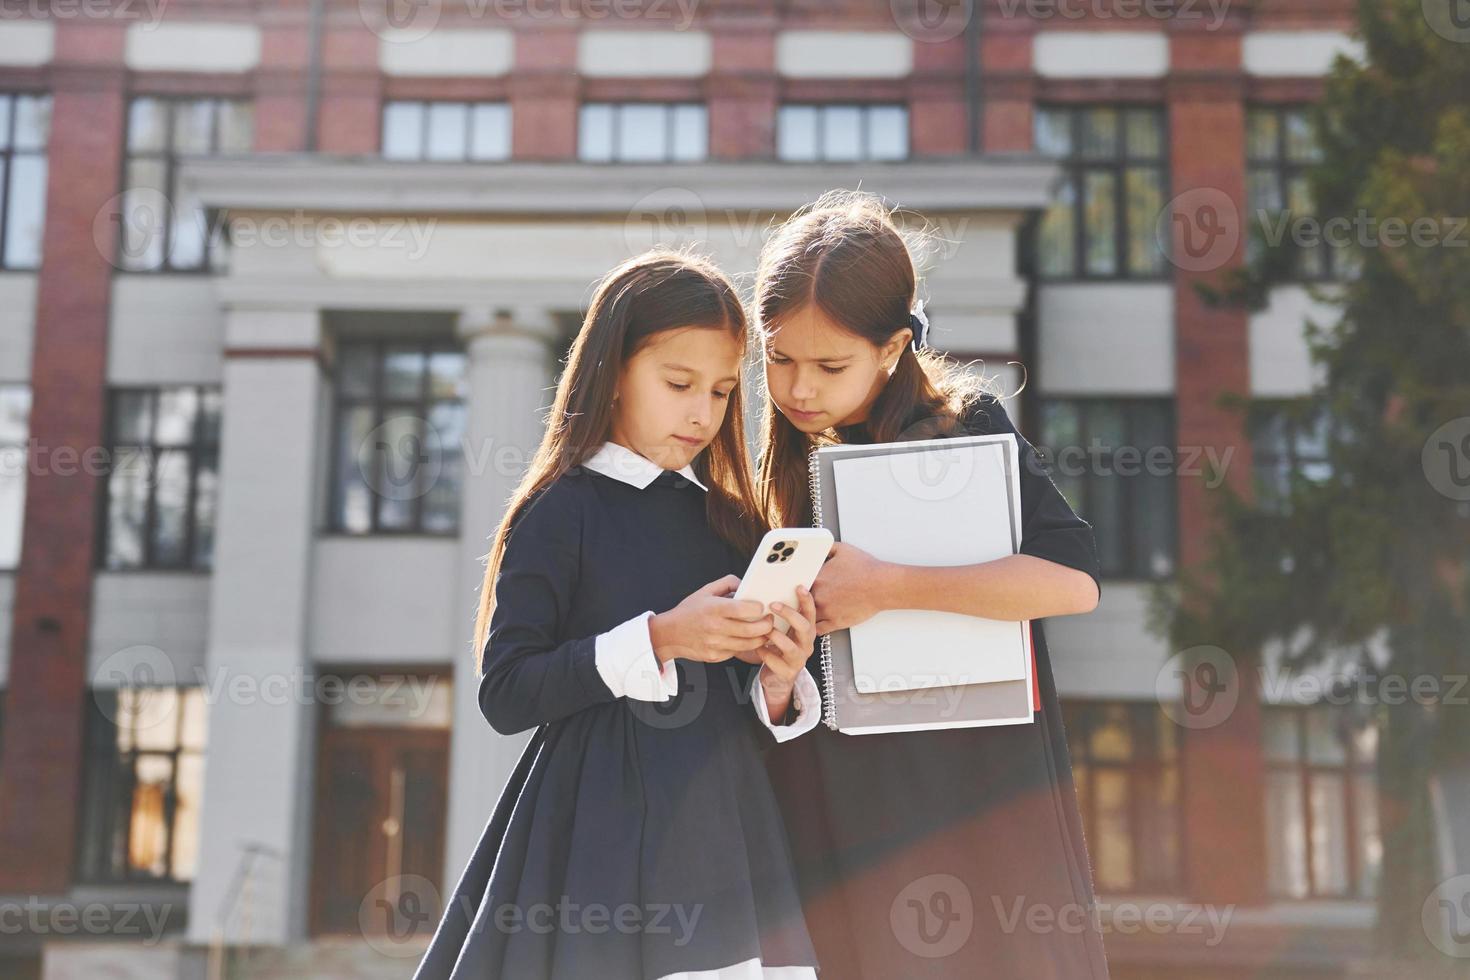 Holding books. Two schoolgirls is outside together near school building photo